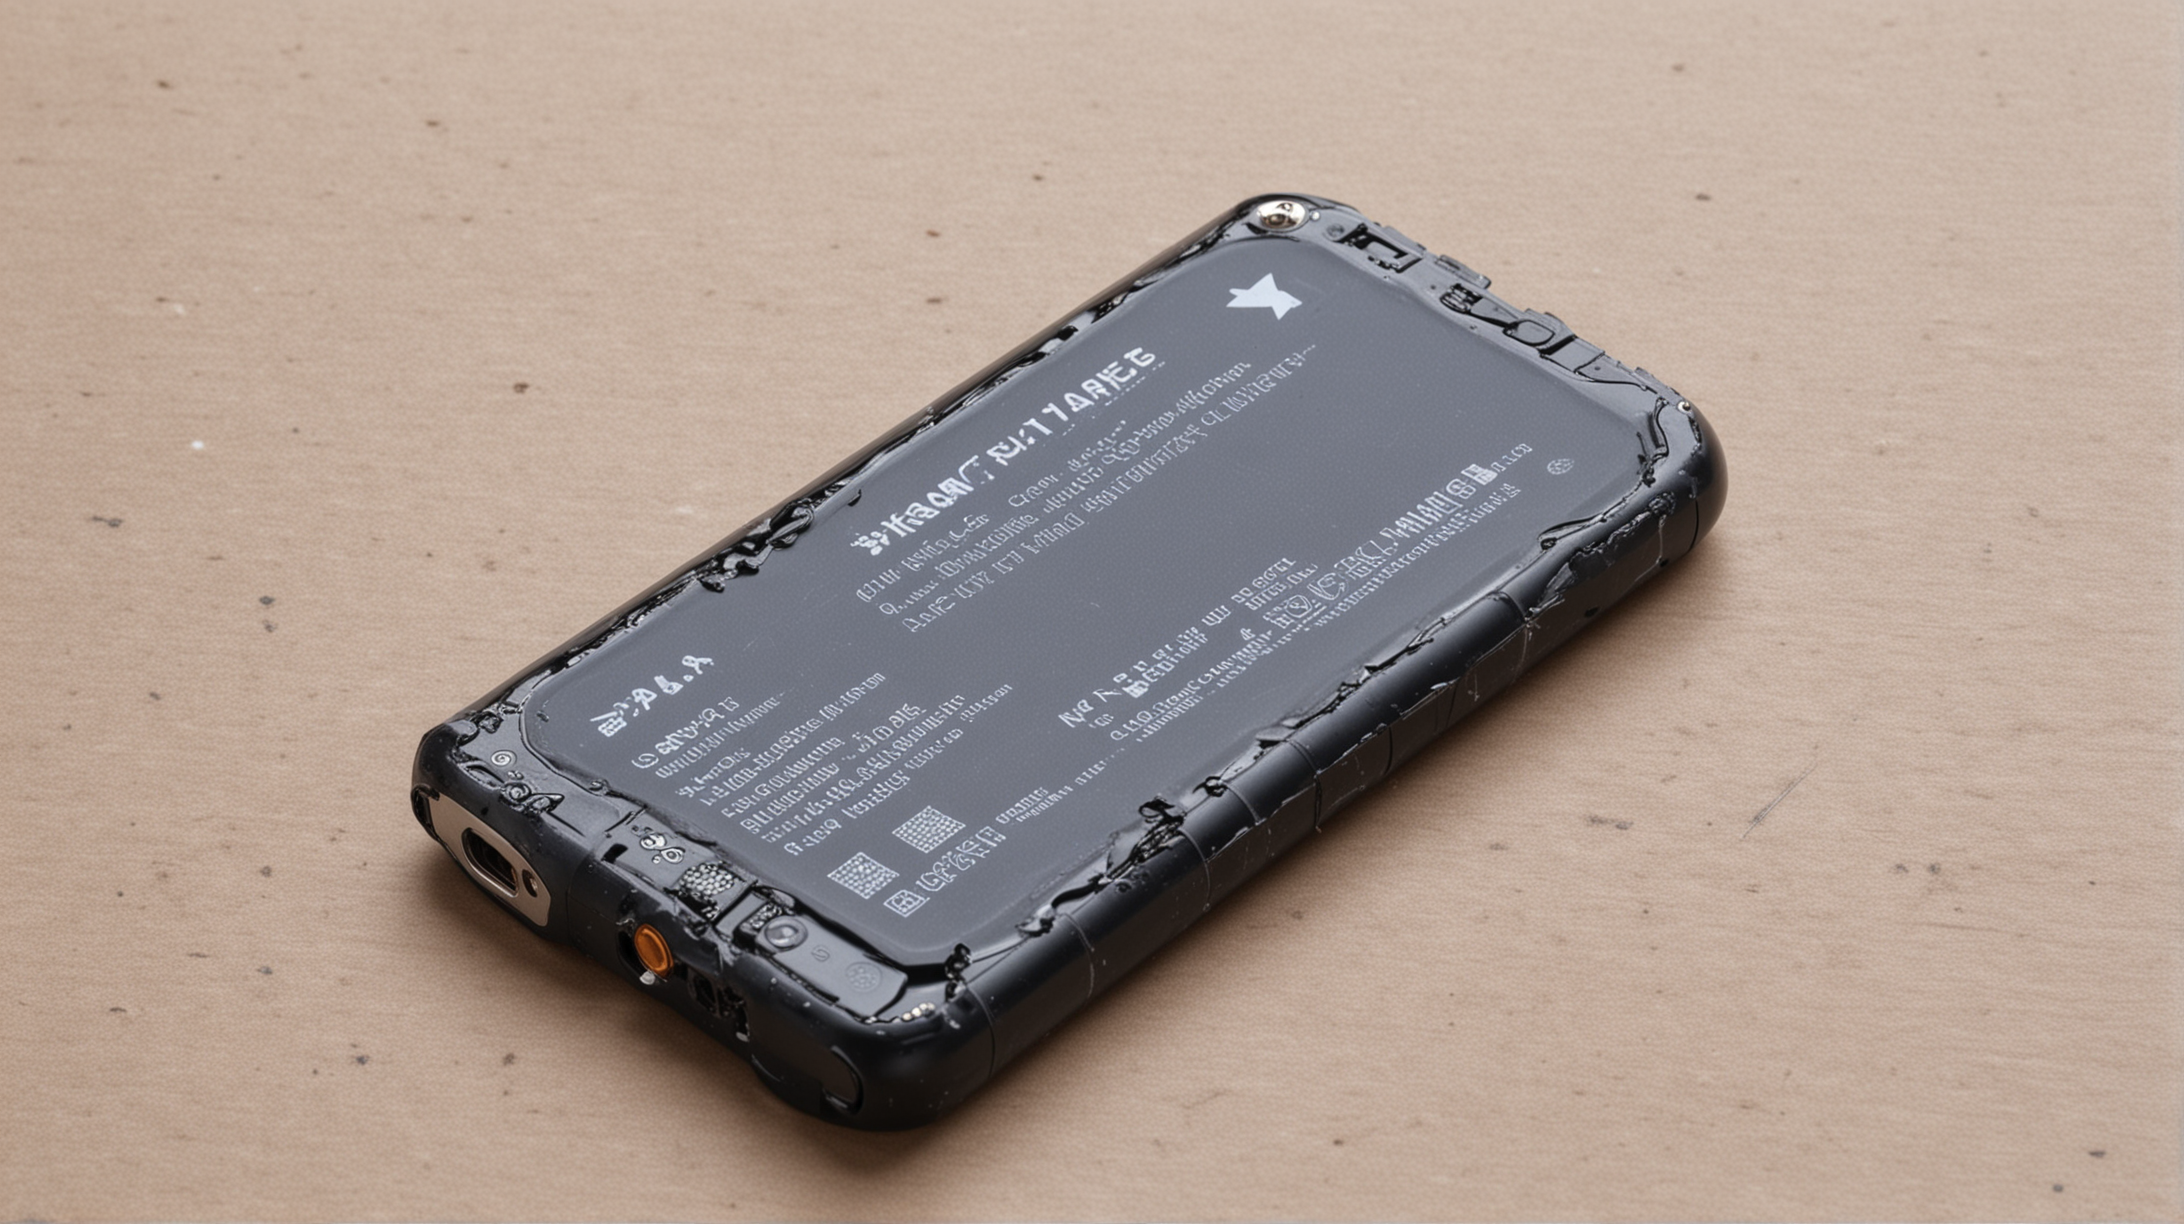 Repairing Damaged Cellphone Battery with Sealing